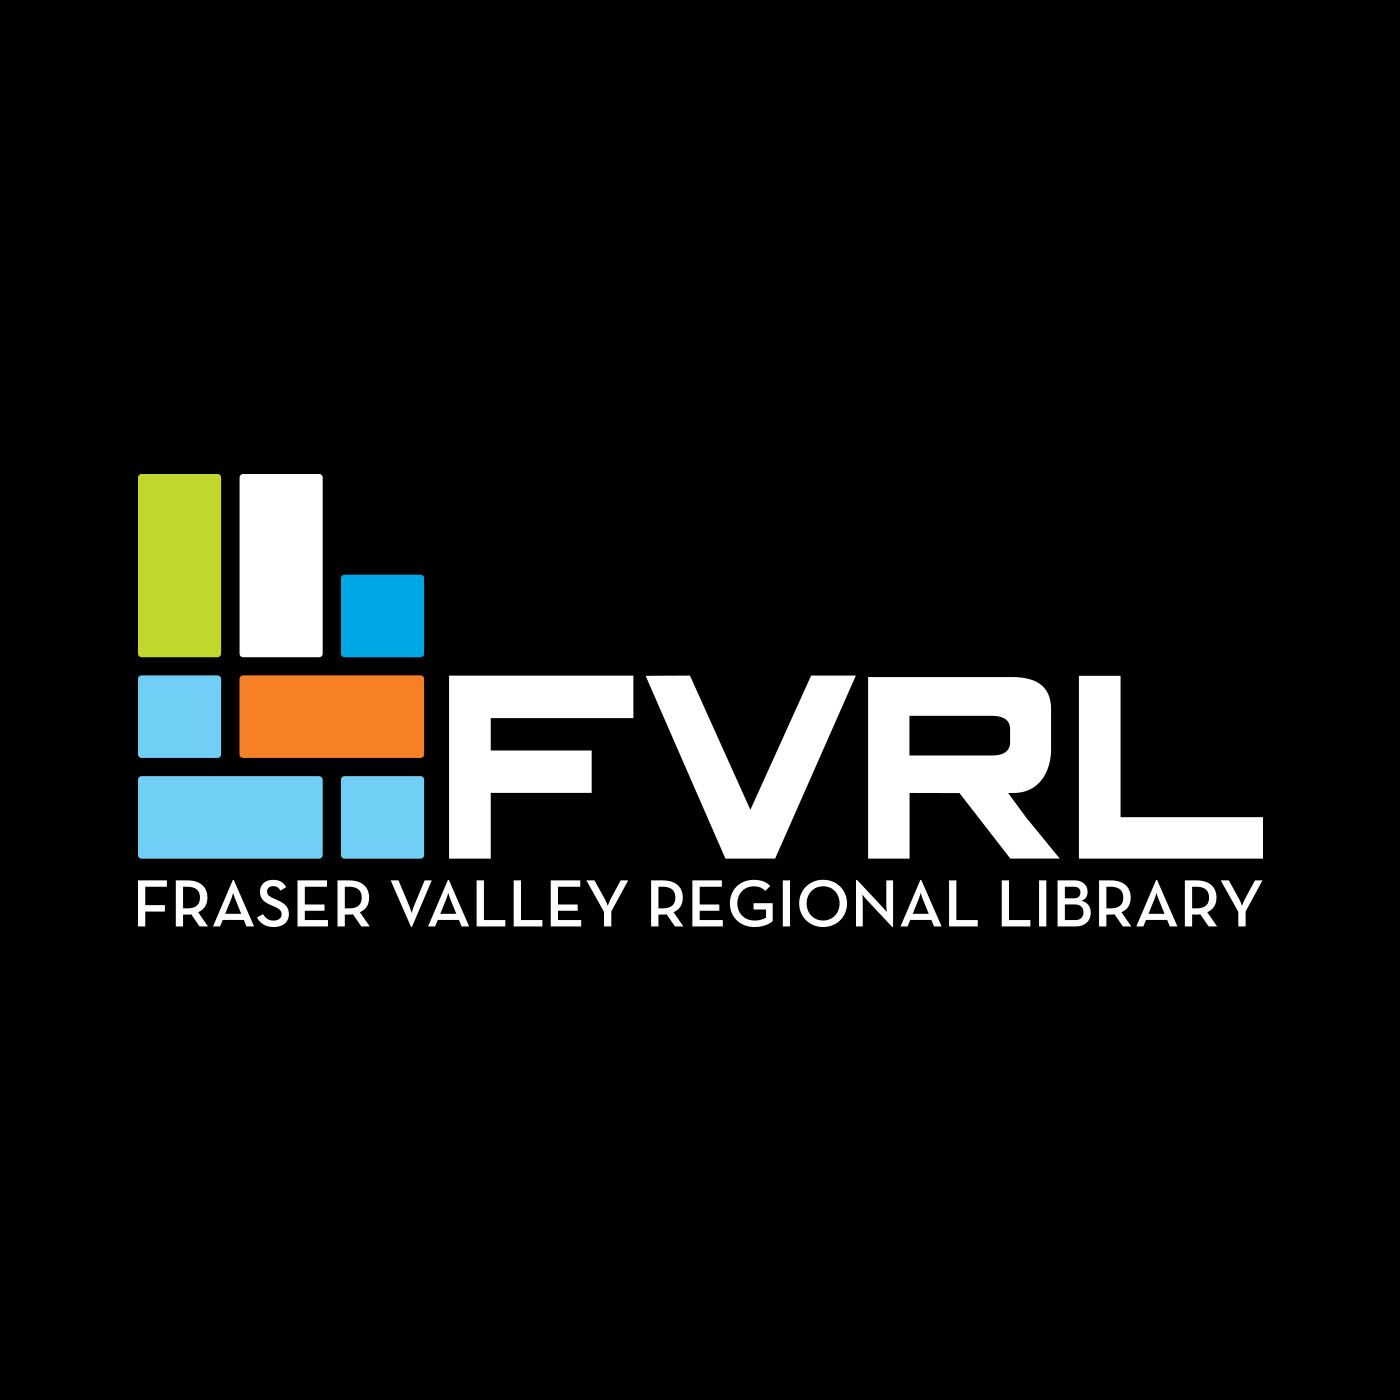 FVRL to Participate in Library Day at the PNE Fair